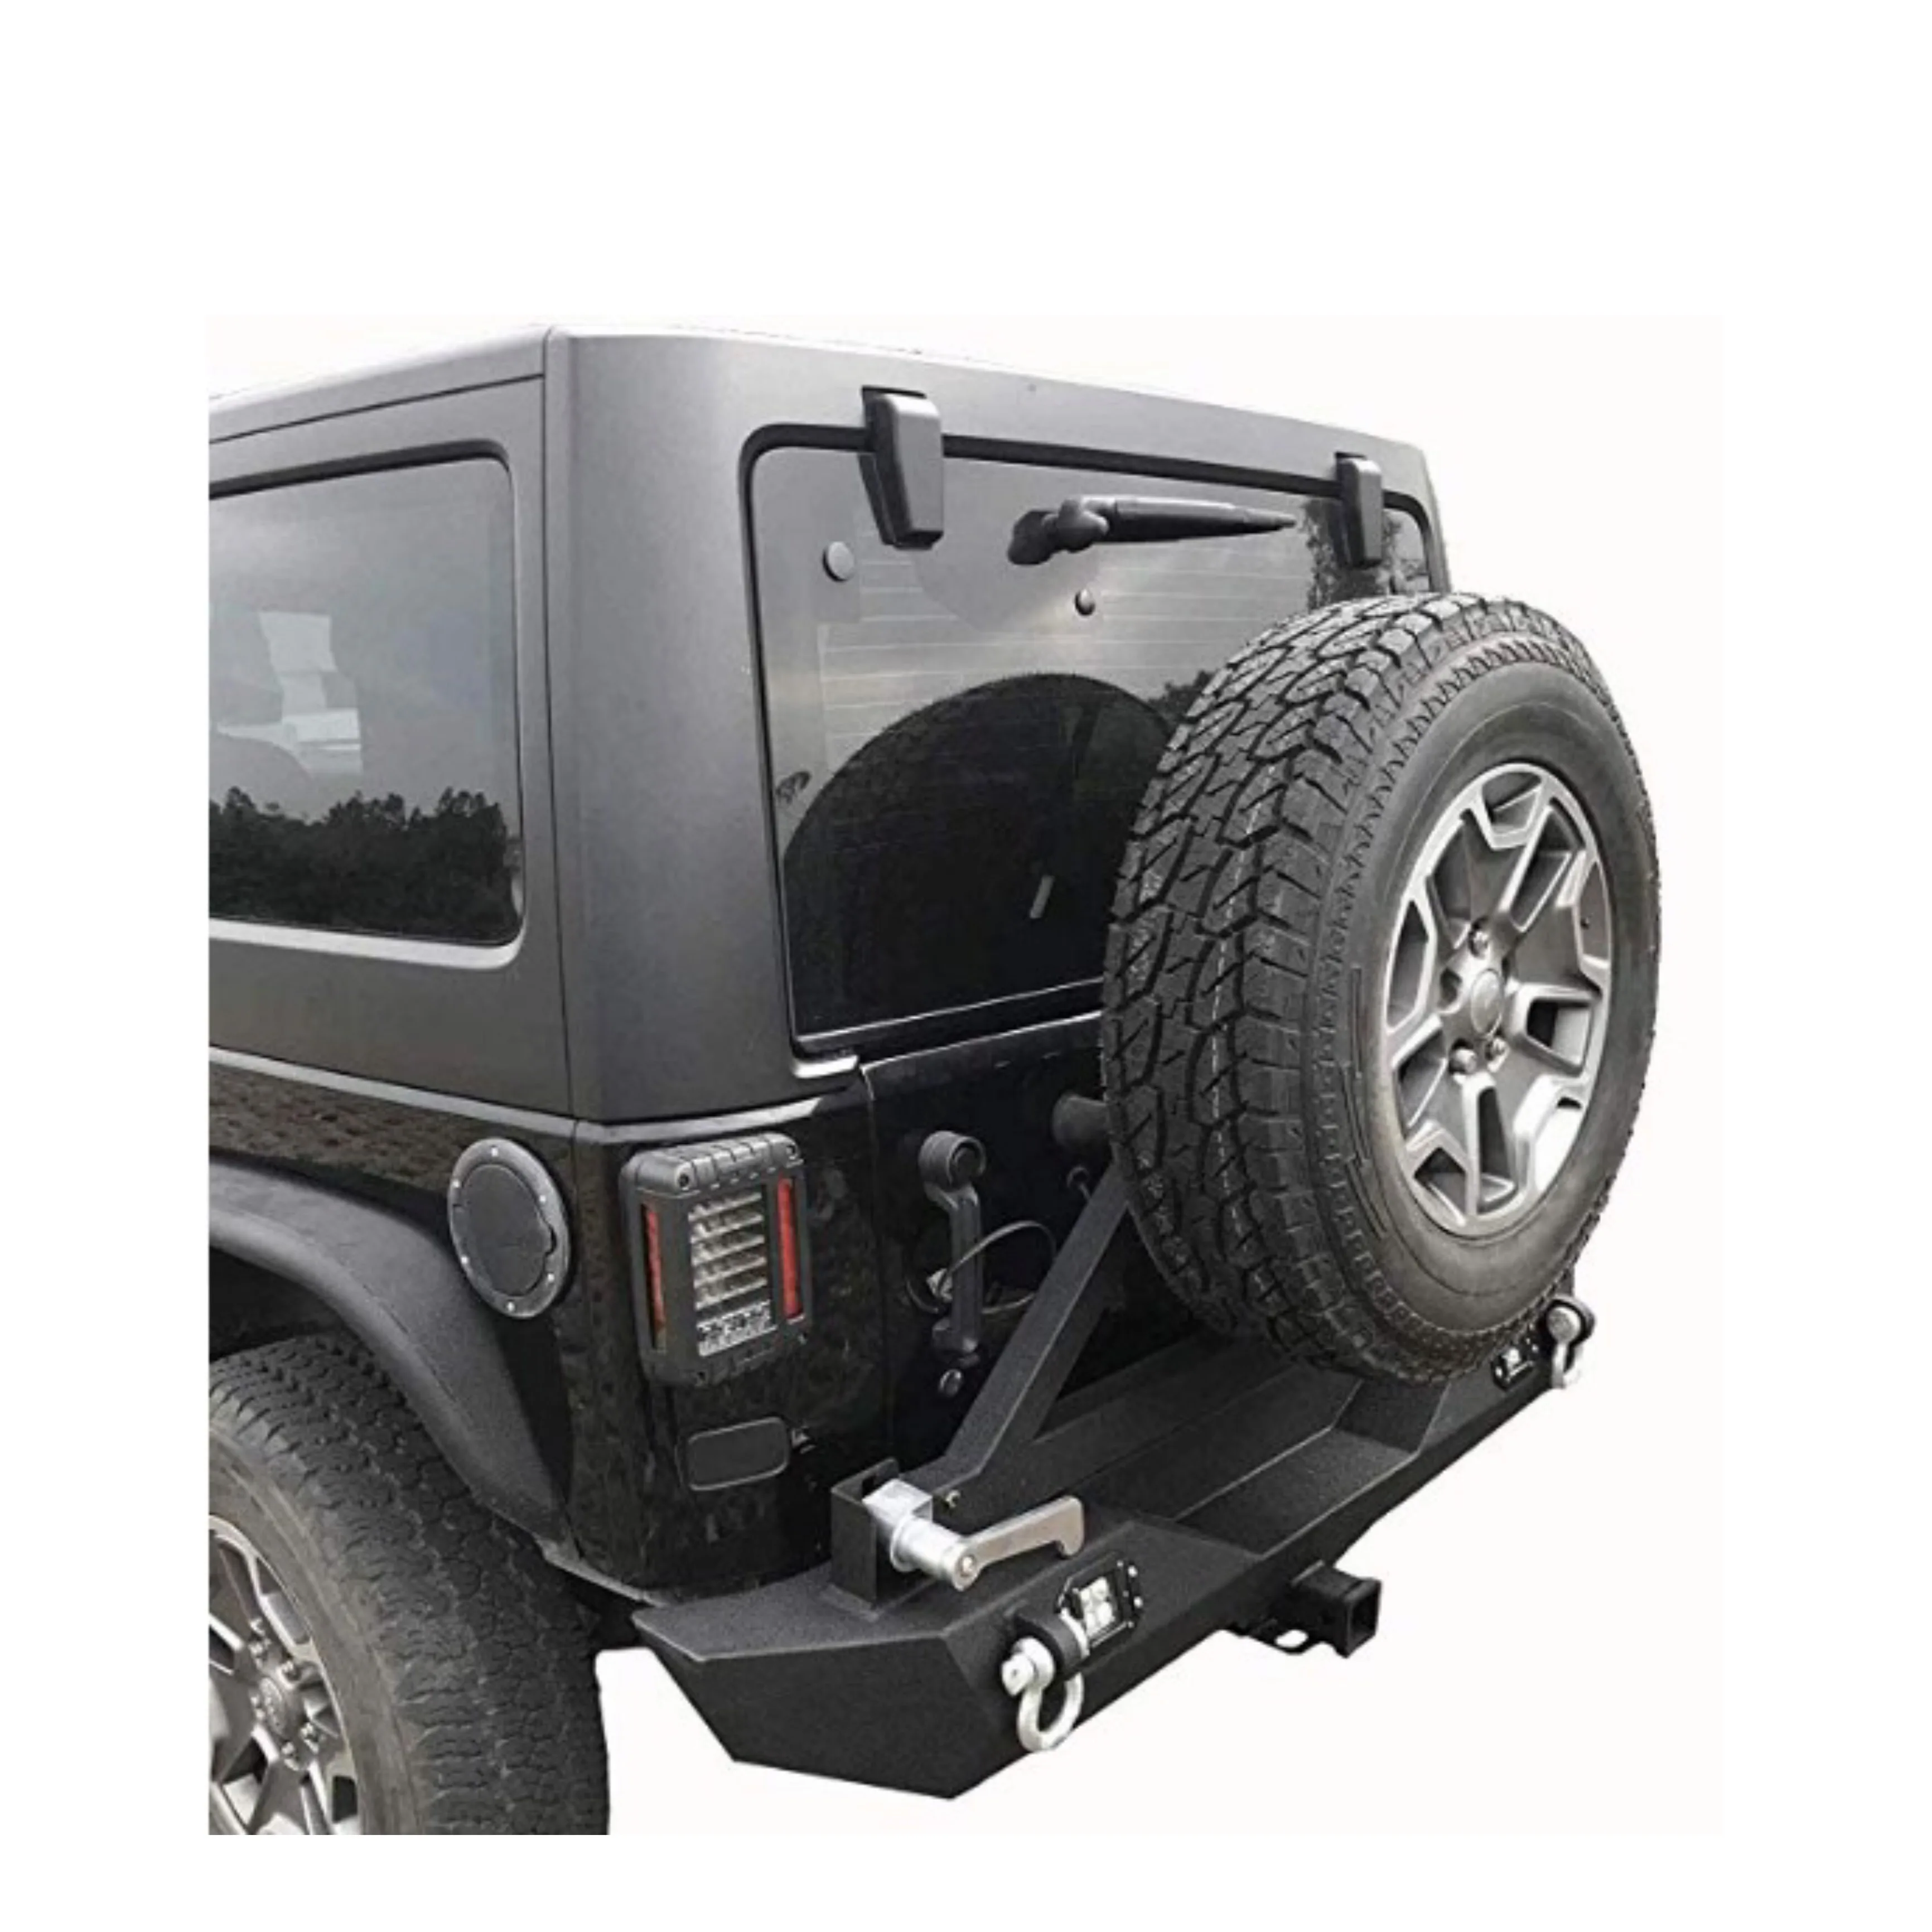 Offroad Rear Bumper With Tire Carrier For Jeep Wrangler - Buy Rear Tubular  Bumper W/wrap-around In Textured Black For Jeep Wrangler Accessories,High  Strength D-ring Mounts With D-rings Included For Jeep Wrangler Jk